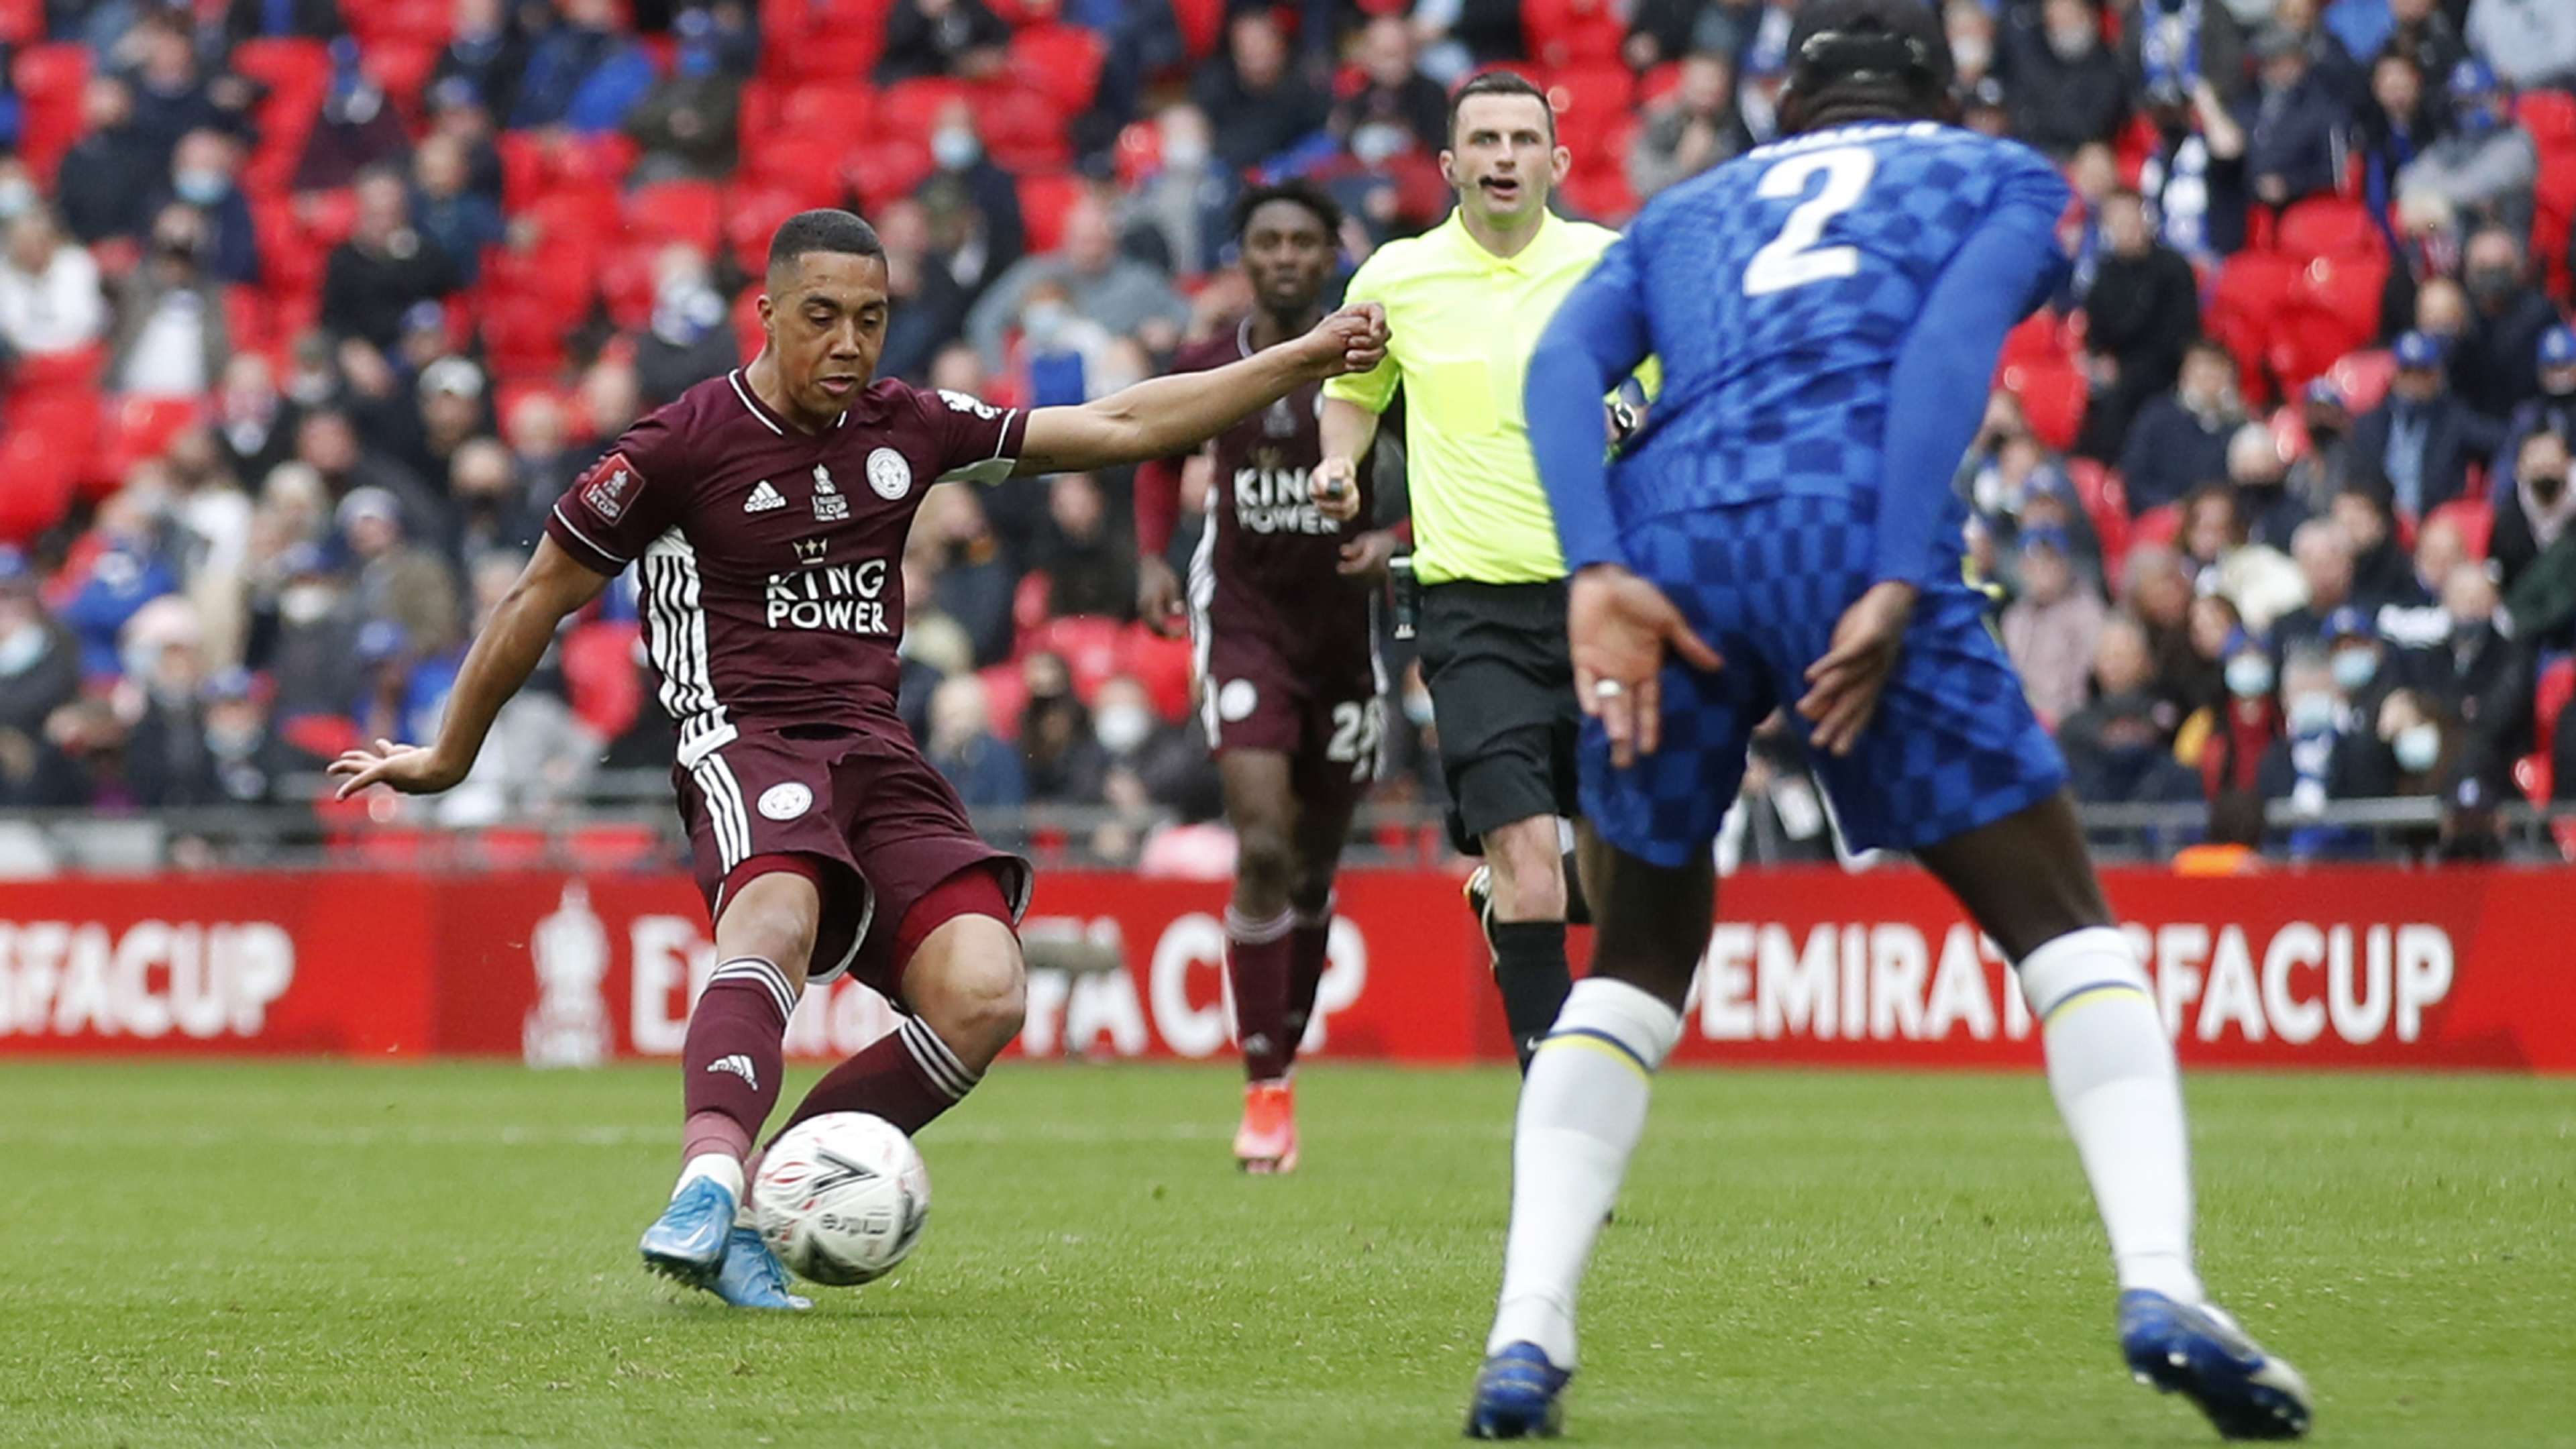 But Tielemans finale FA Cup cropped